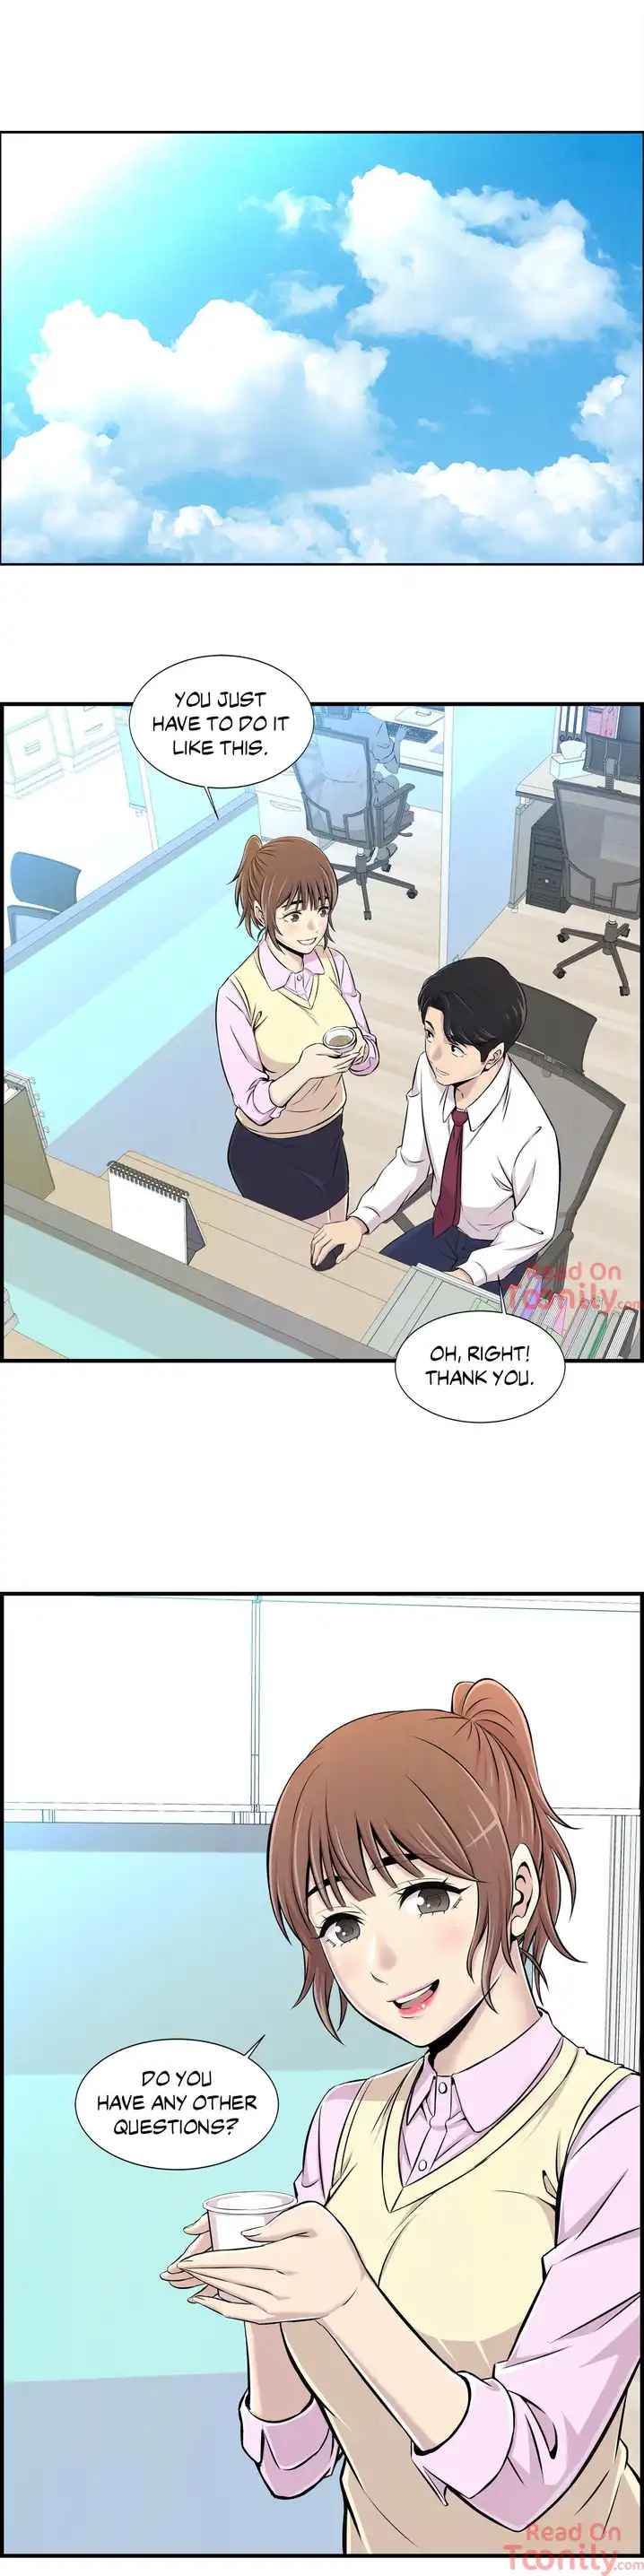 Cram School Scandal - Chapter 1 Page 22